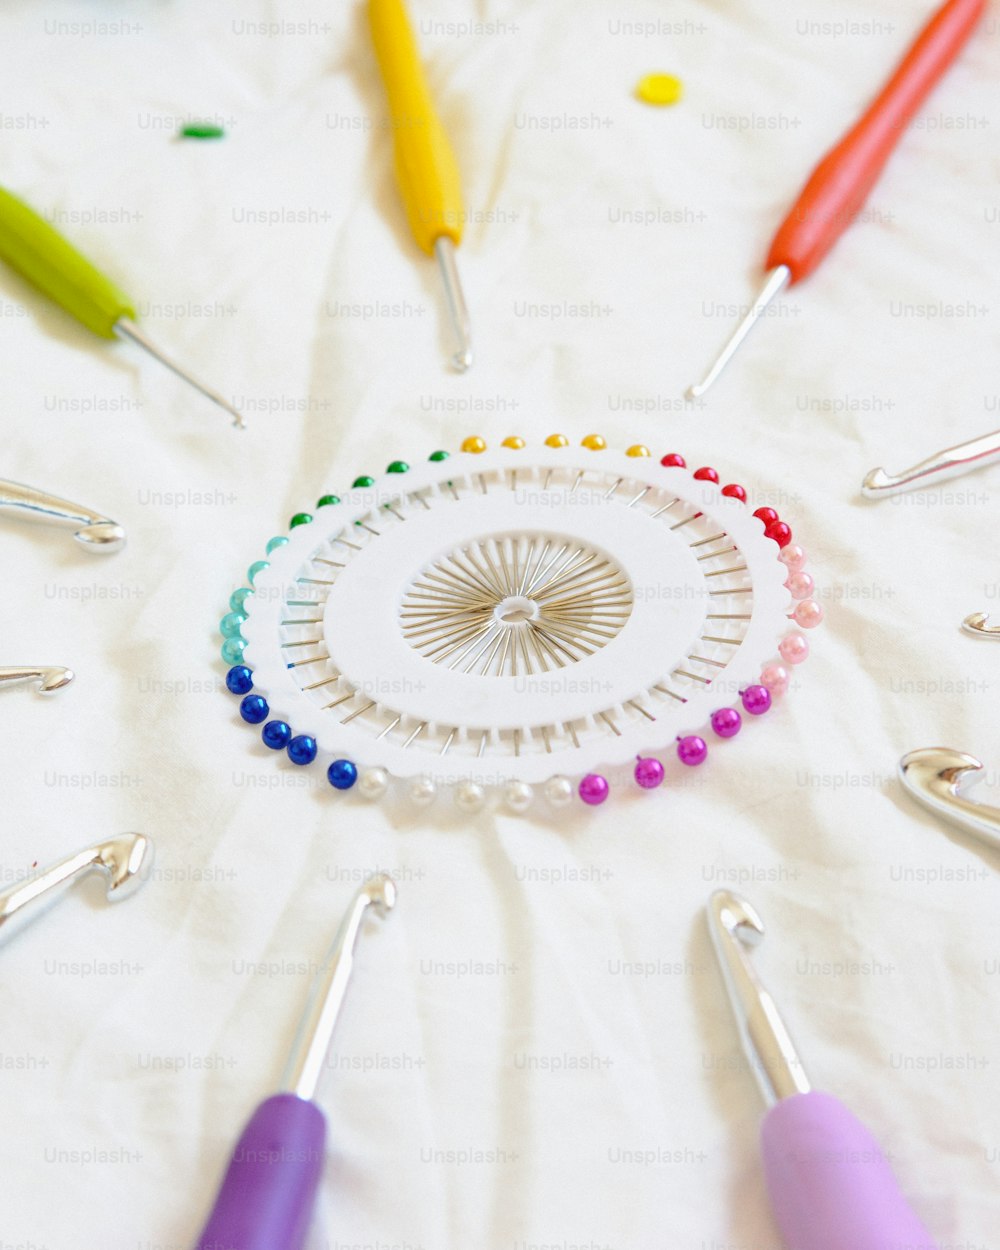 a group of crochet hooks and needles arranged in a circle